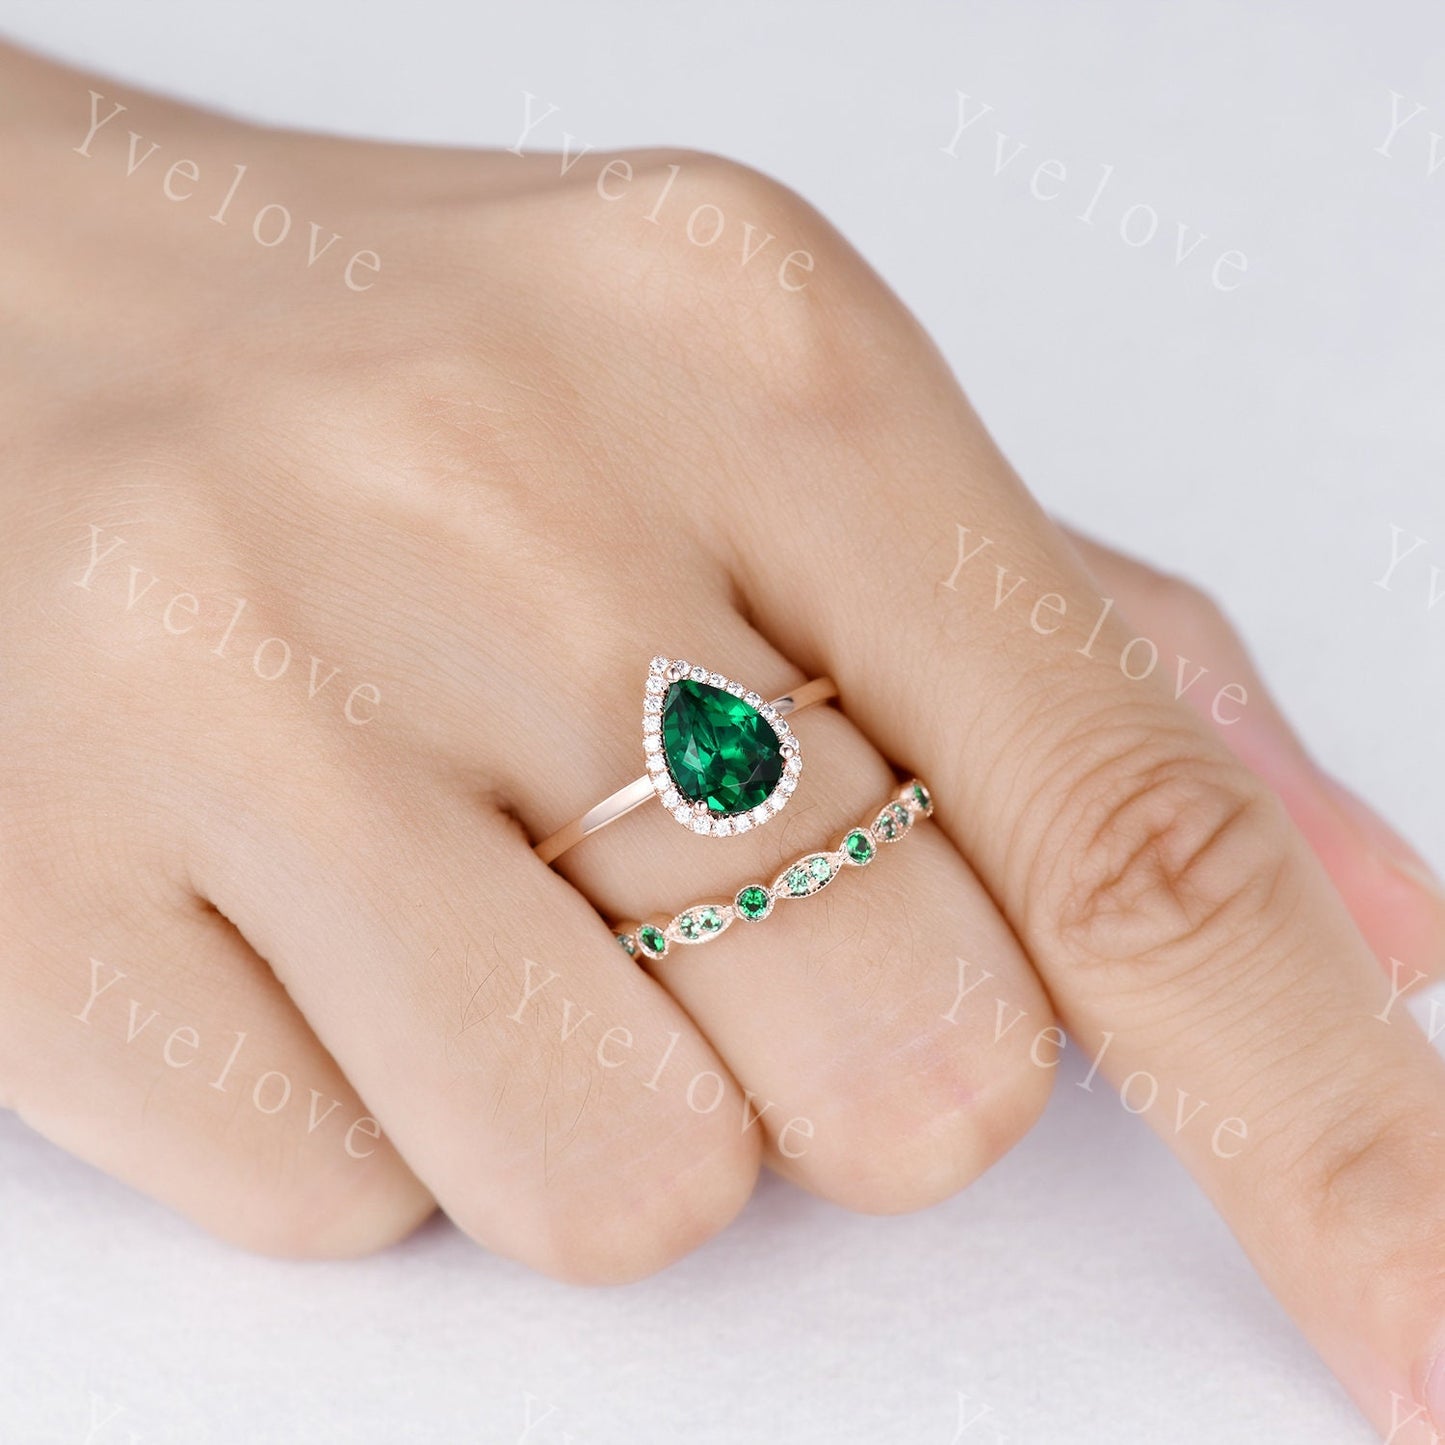 Emerald engagement ring set,Pear cut Emerald Solitaire Ring,14k yellow gold,May Birthstone Ring, Half Eternity diamond matching band Custom